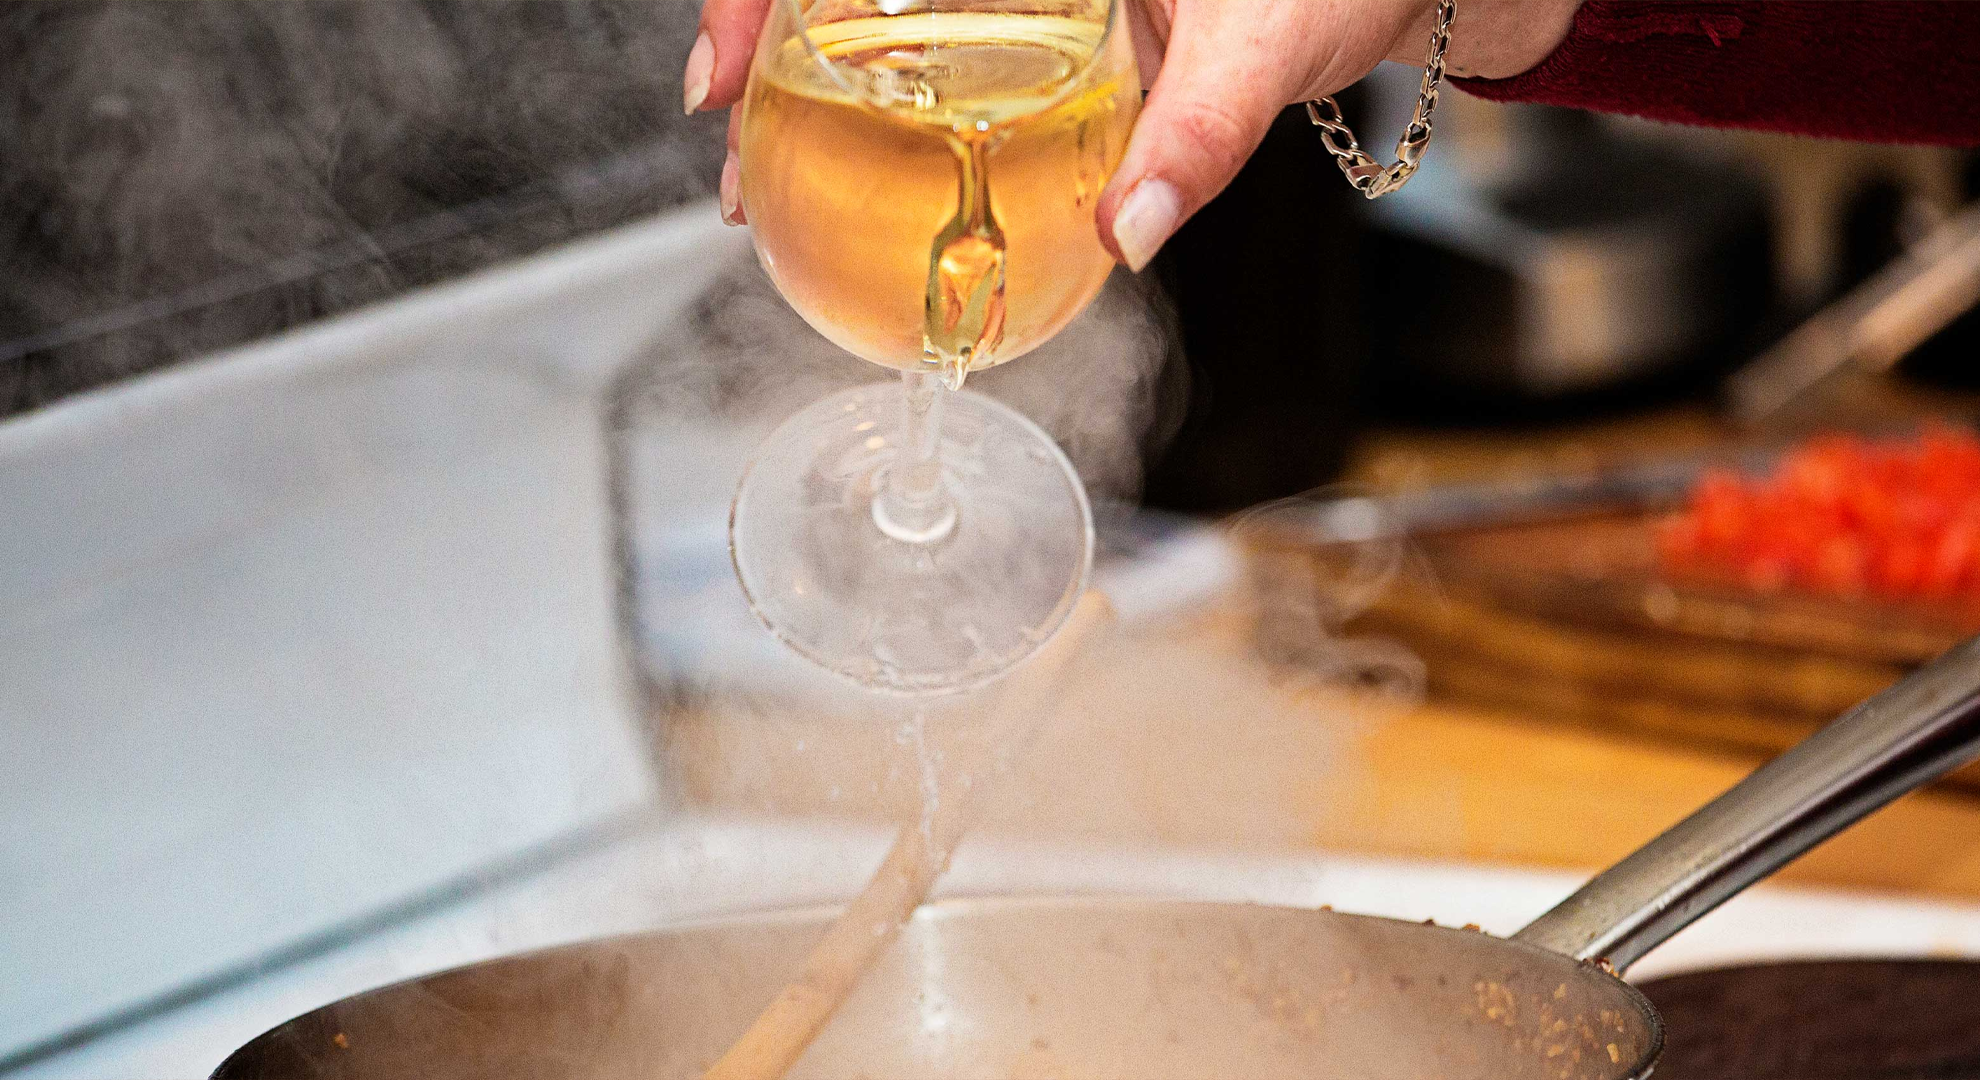 Wine being poured into a cooking pot over a stove.